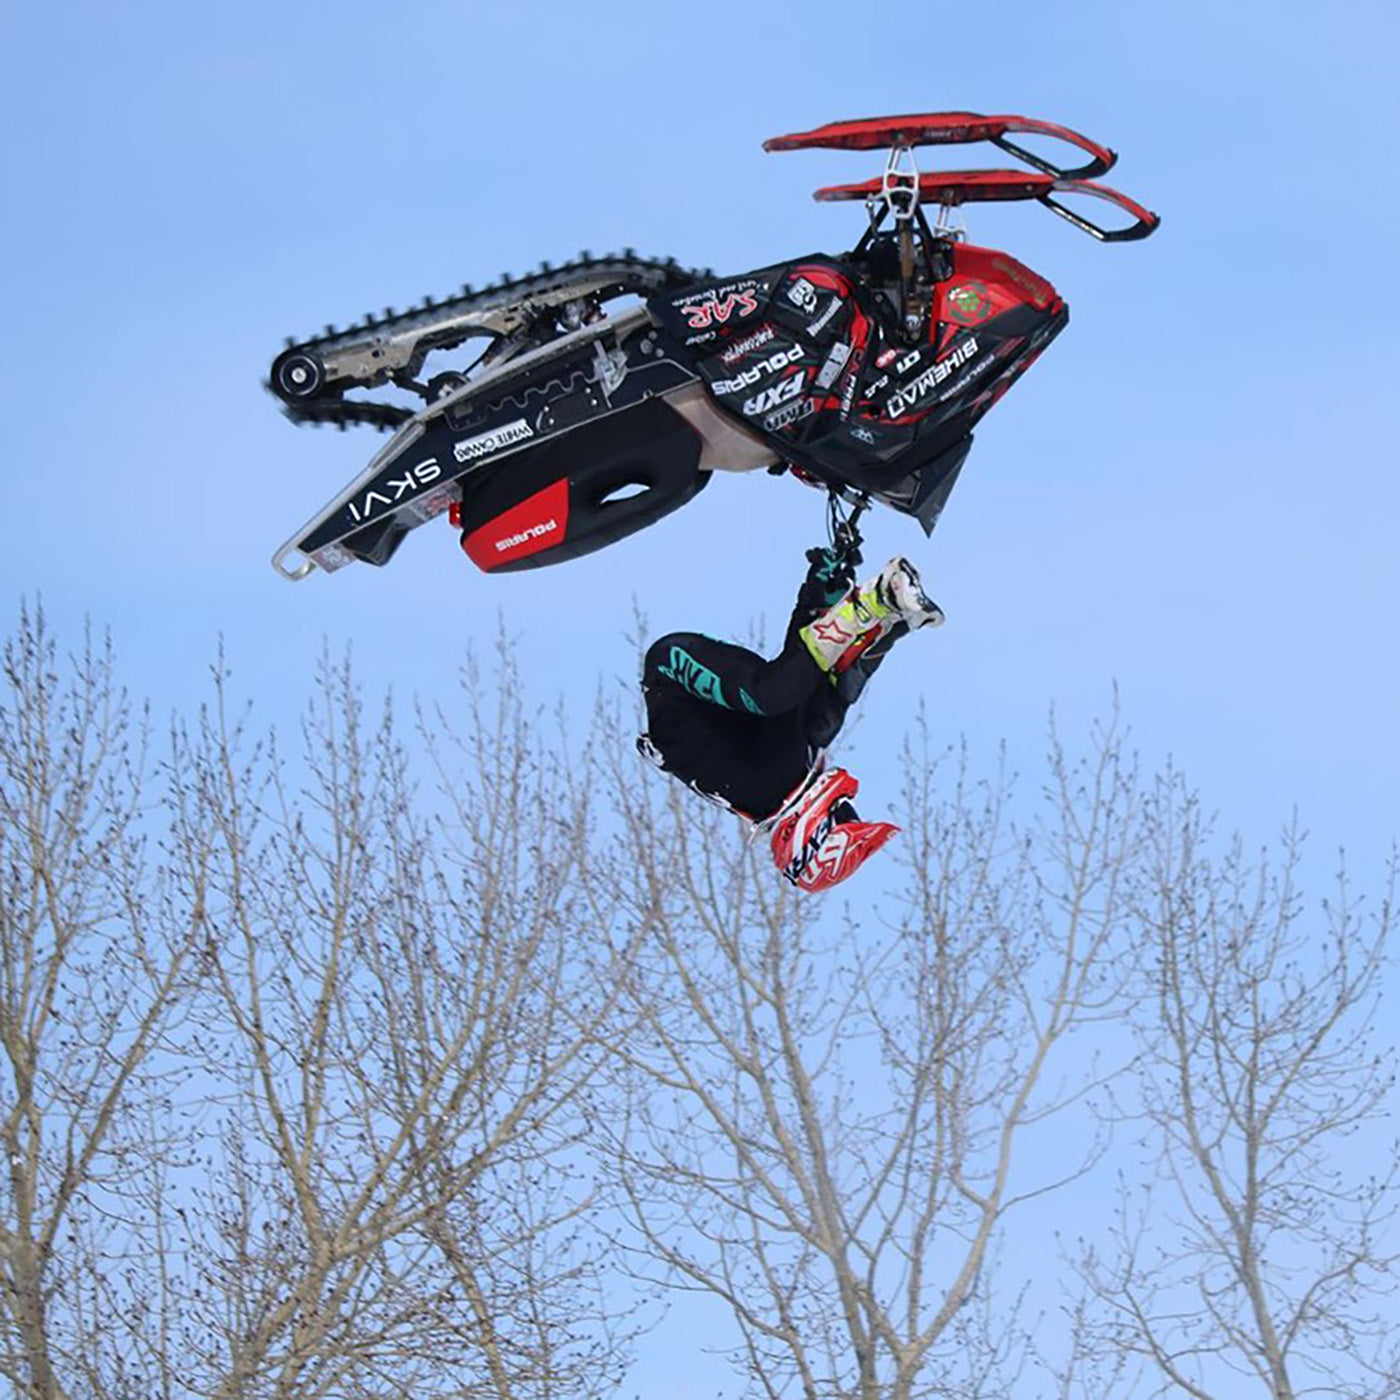 Josh Penner midair flip with custom red and black C&A Pro skis with black handles